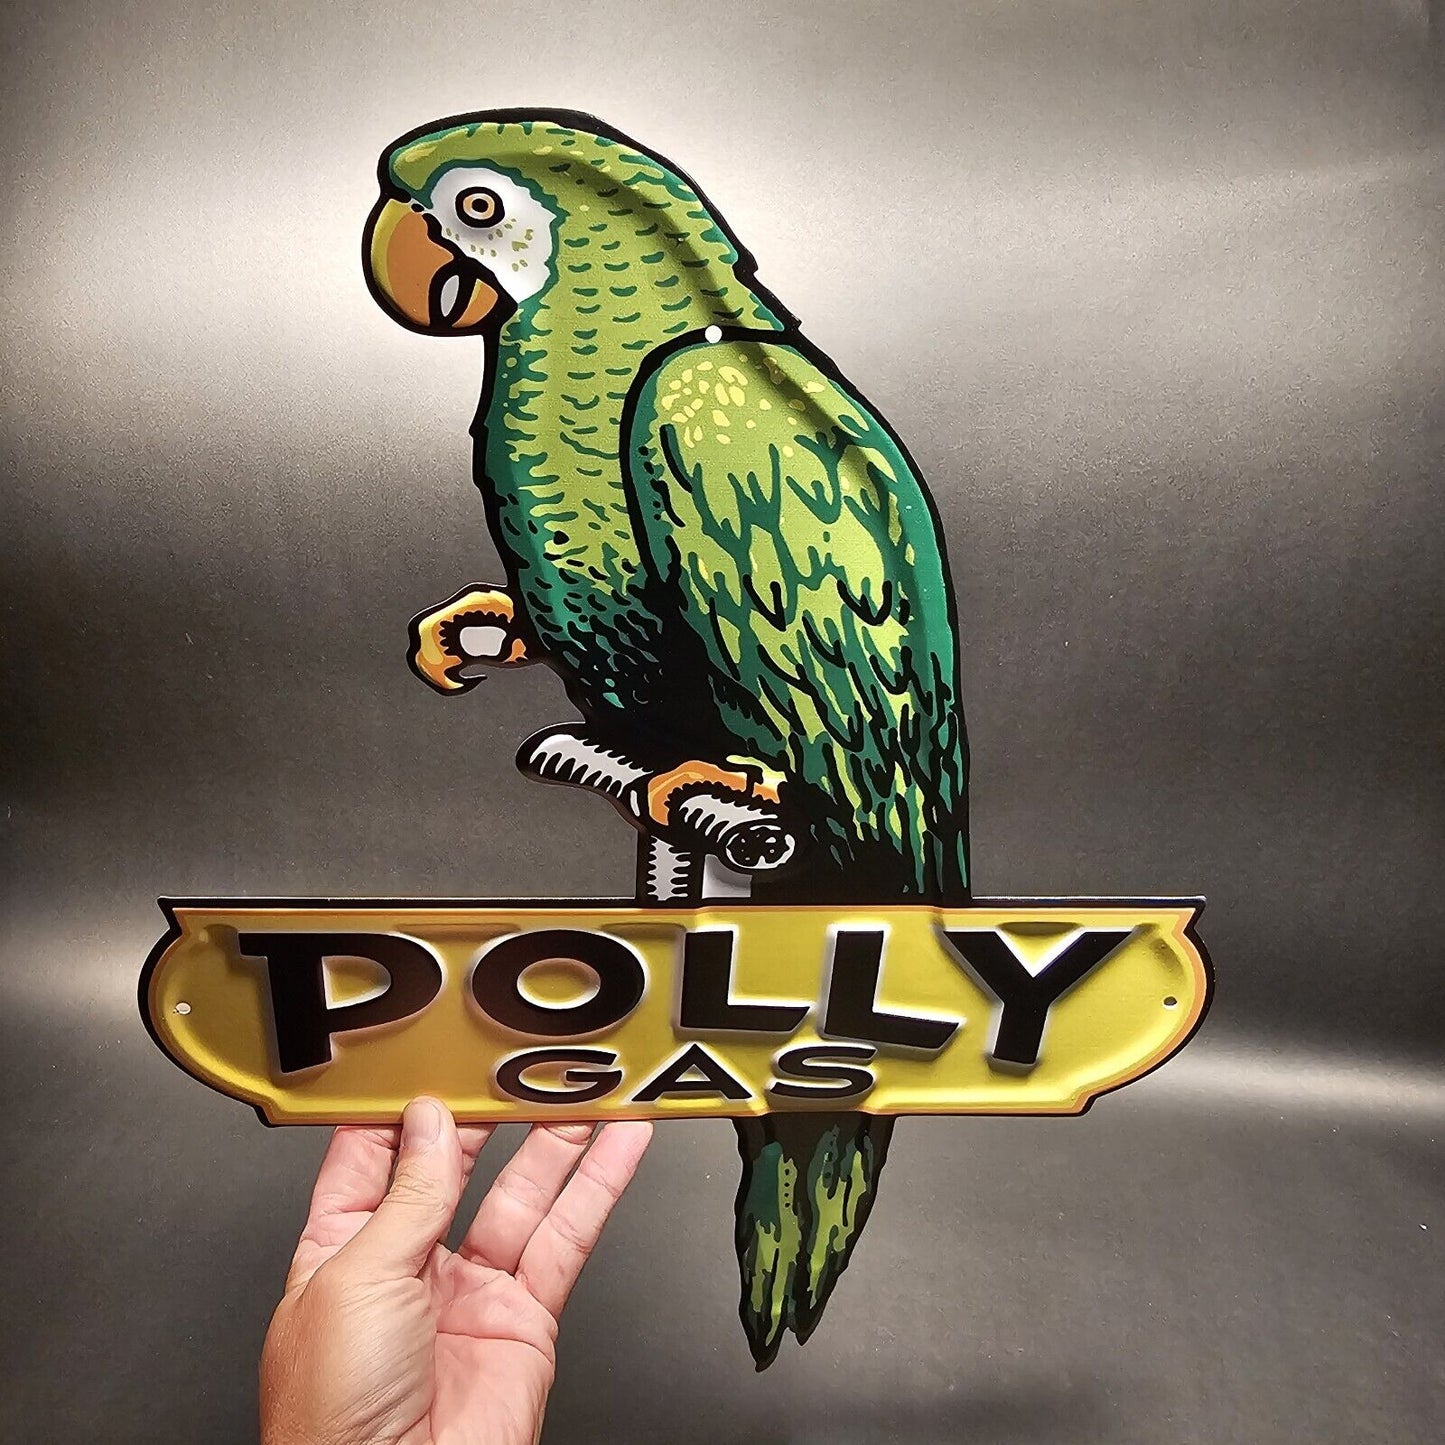 18"  Vintage Style Metal Polly Gas Car Sign